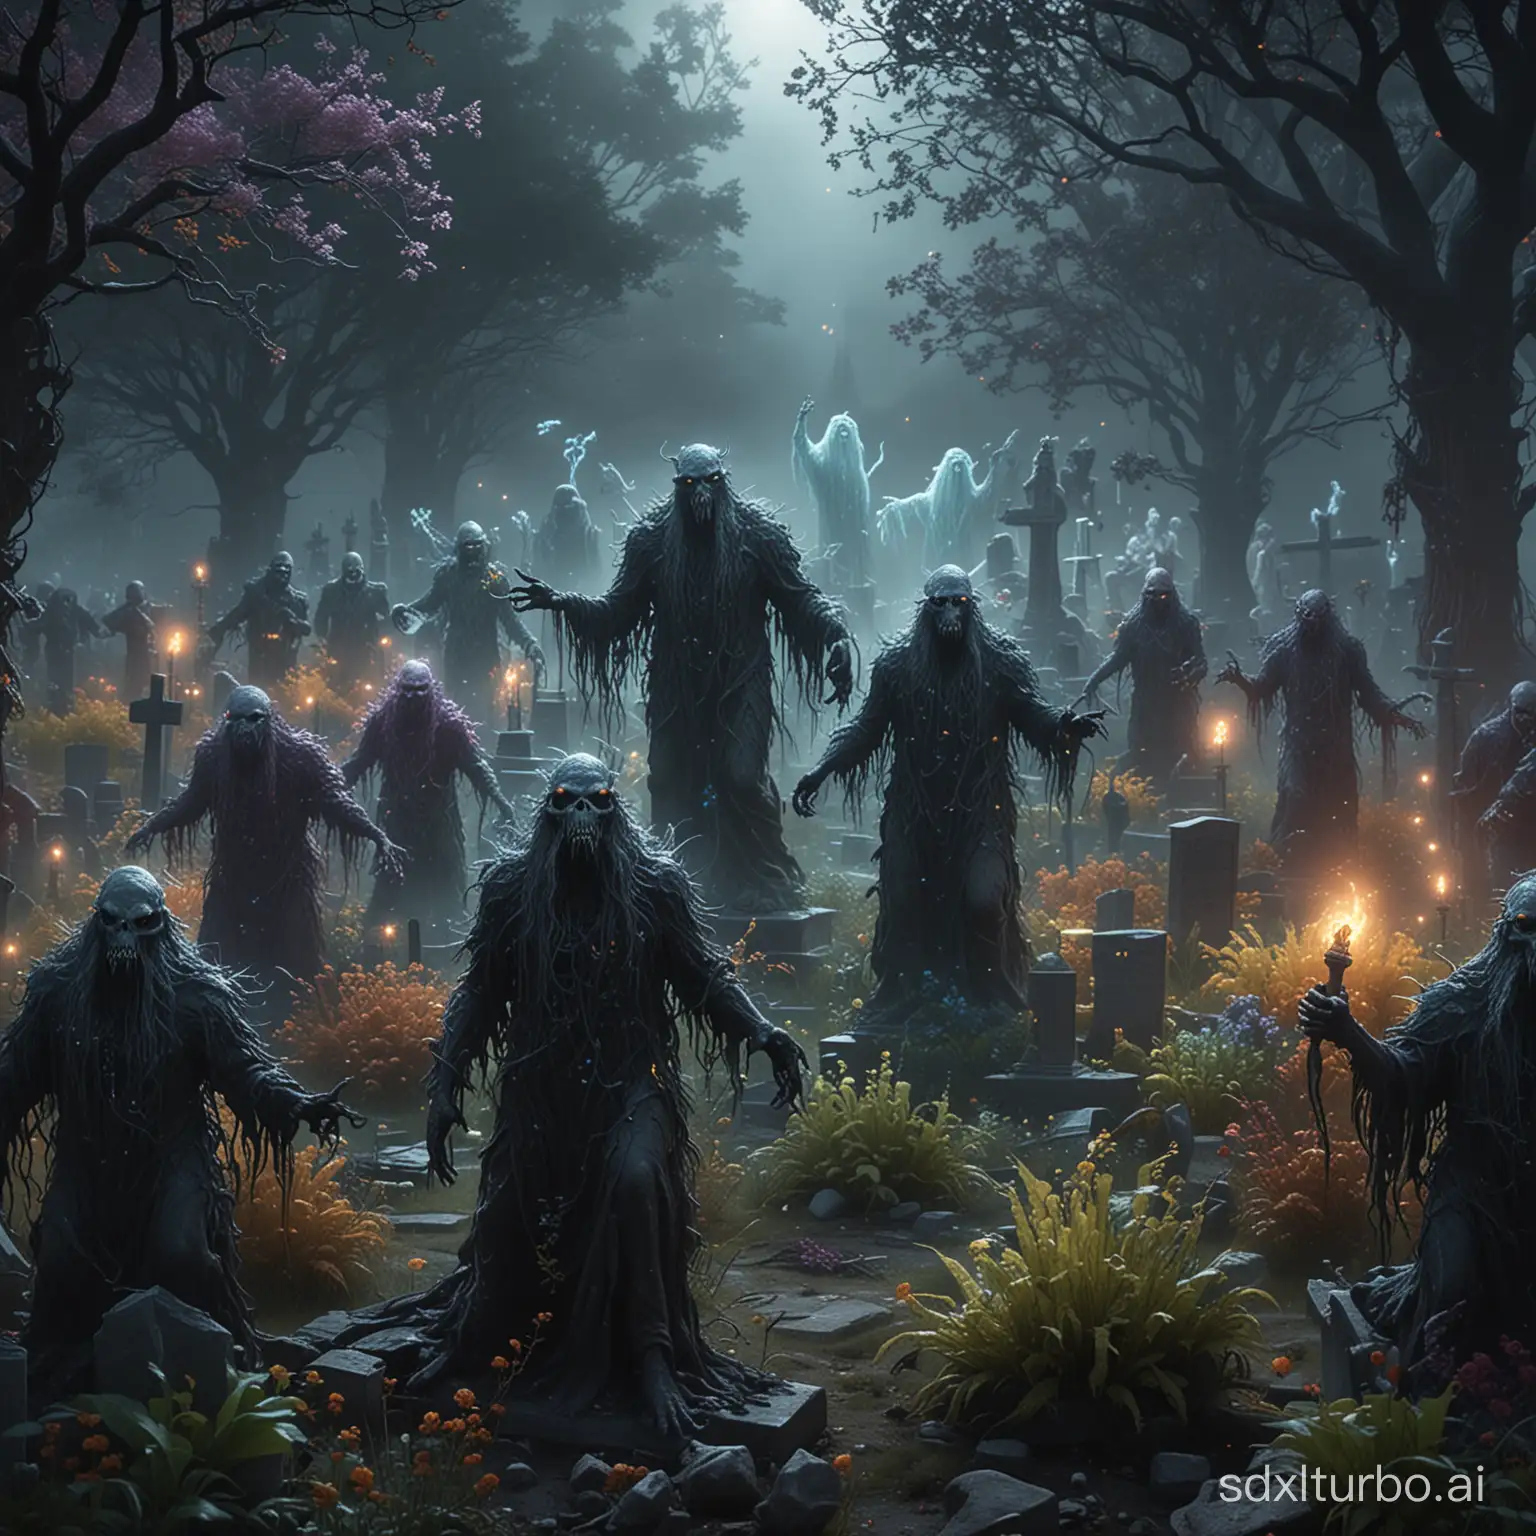 A group of evil monsters dance in the cemetery. Surrounded by will-o'-the-wisps, luminous plants, dreamlike light. Highly detailed, realistic, and colorful as hell.